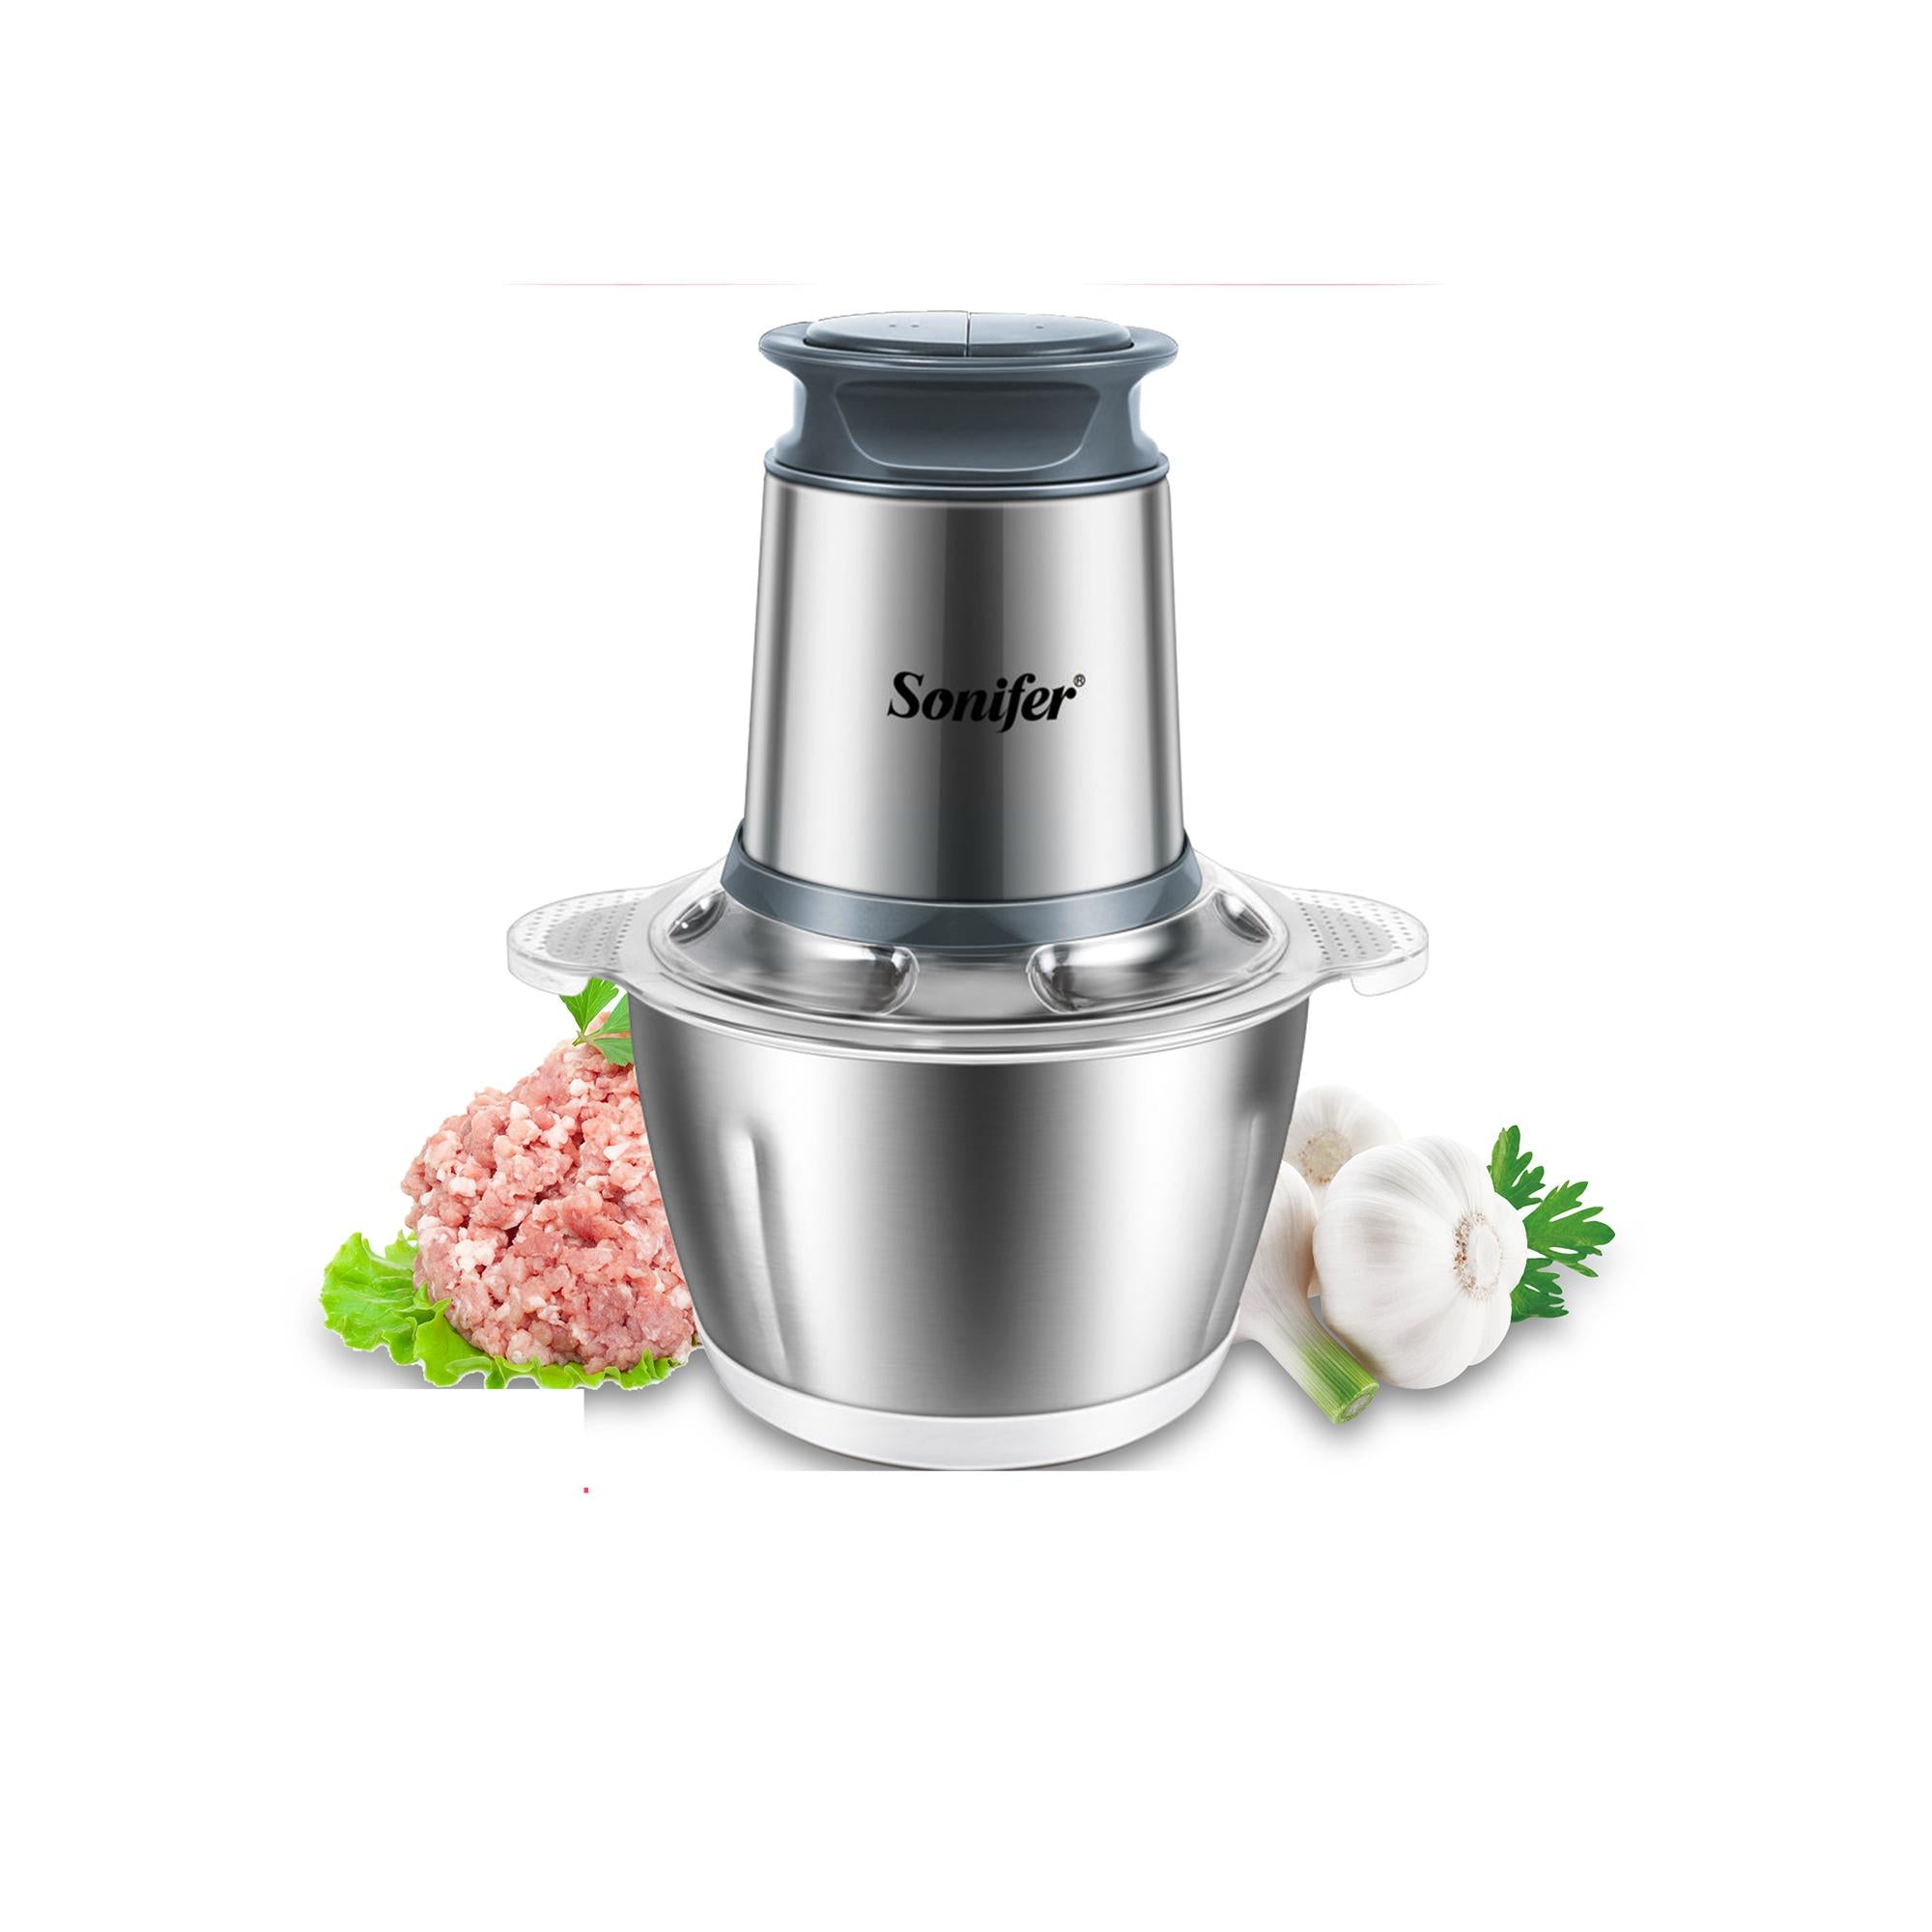 2 Speeds Stainless Steel Electric Vegetable and Meat Grinder